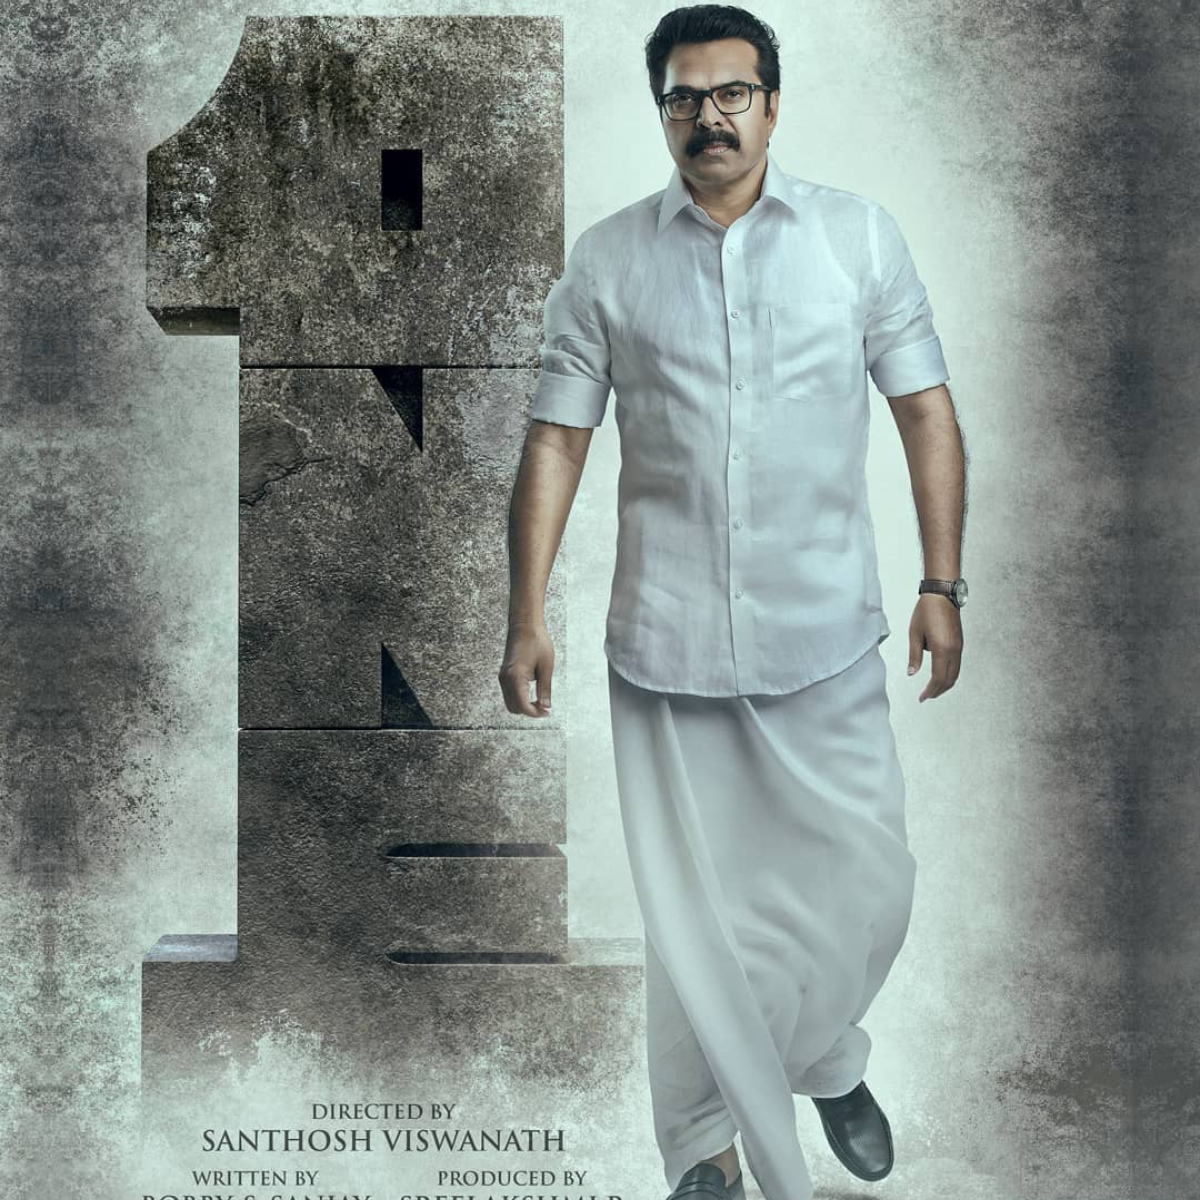 One Movie Twitter Review: Here's what audience has to say about Mammootty starrer political thriller